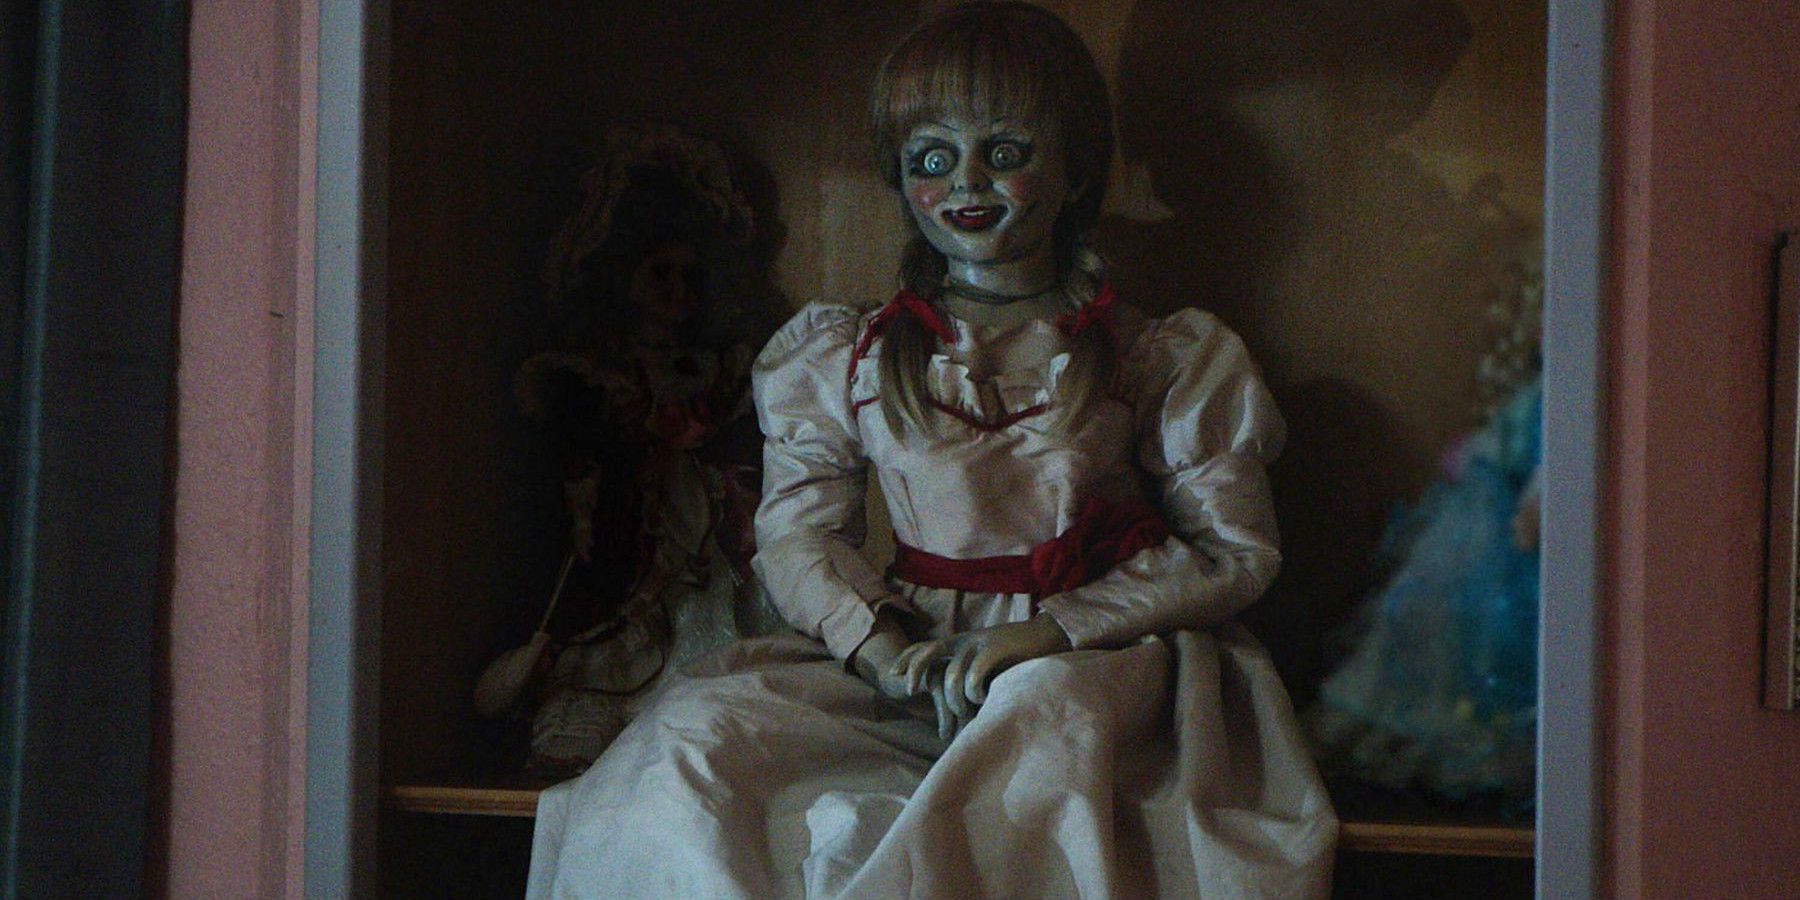 The Conjuring doll